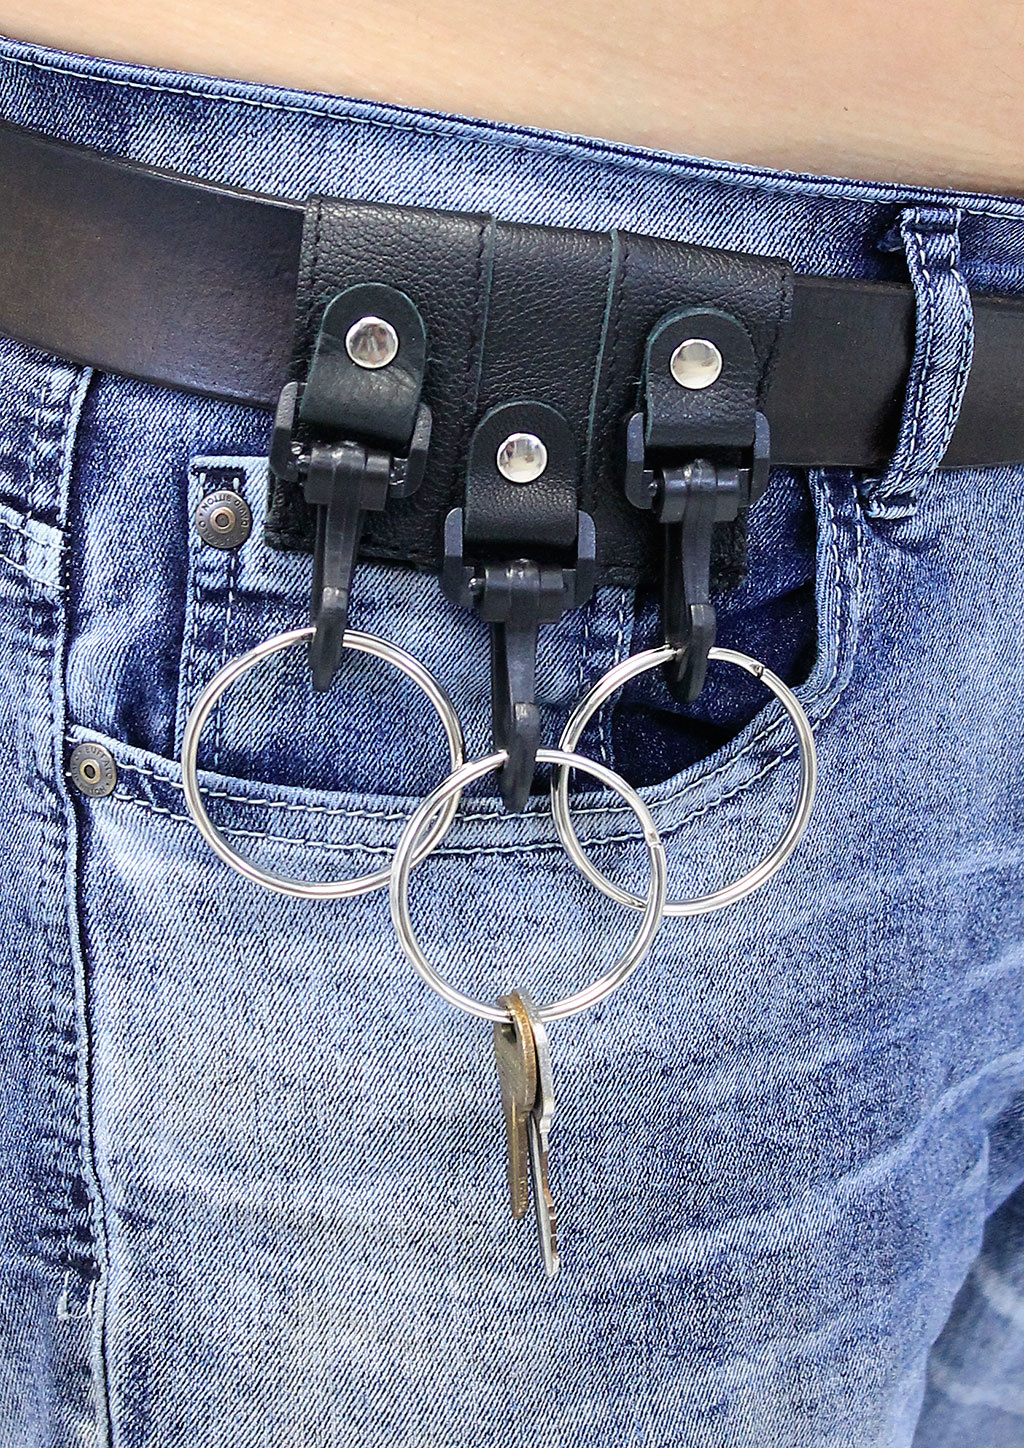 Triple Leather Belt Key Clips with 2 Key Rings #KC22033XK - Jamin Leather®